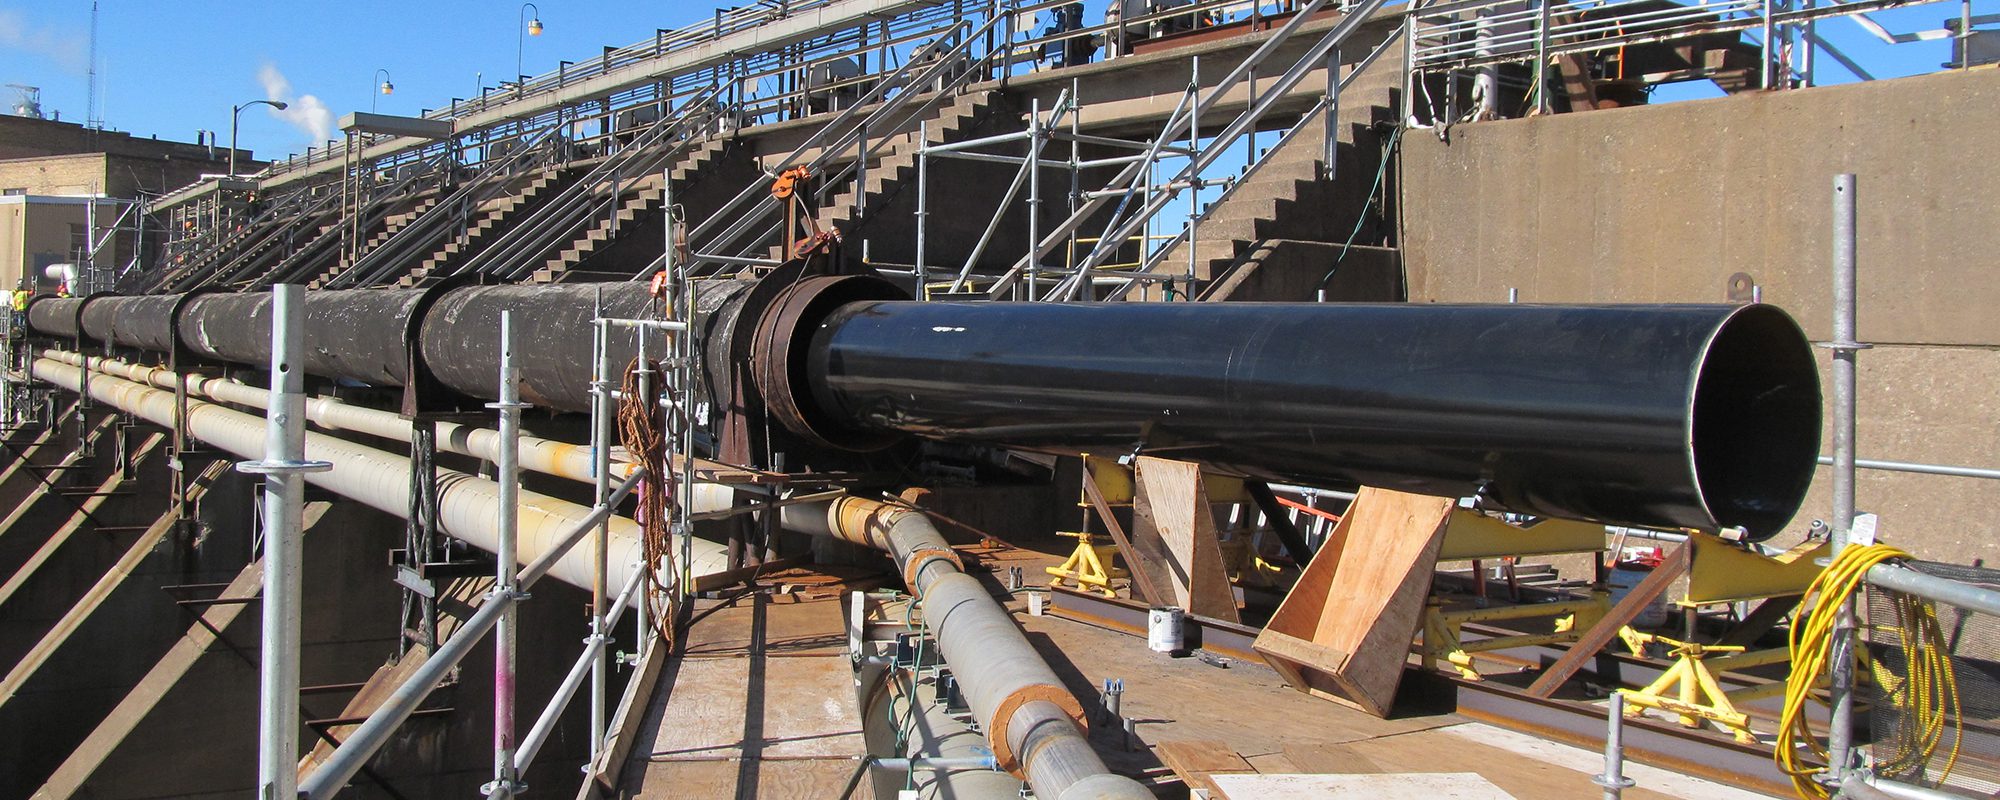 A large black pipe and scaffold at a paper mill facility